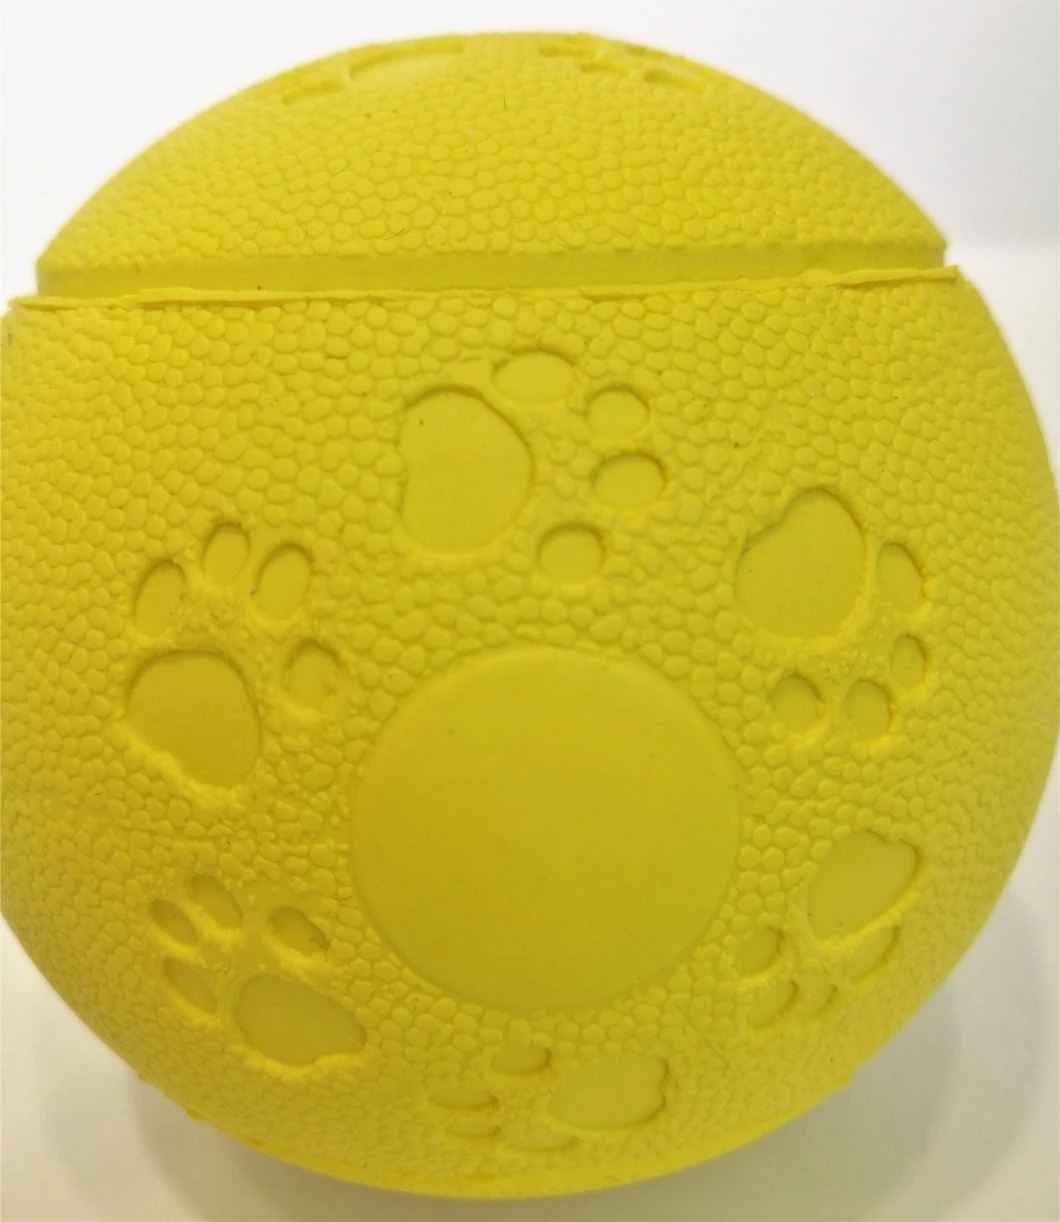 Rubber Dog Toys Chew Toy for Dog Teeth Cleaning Yellow